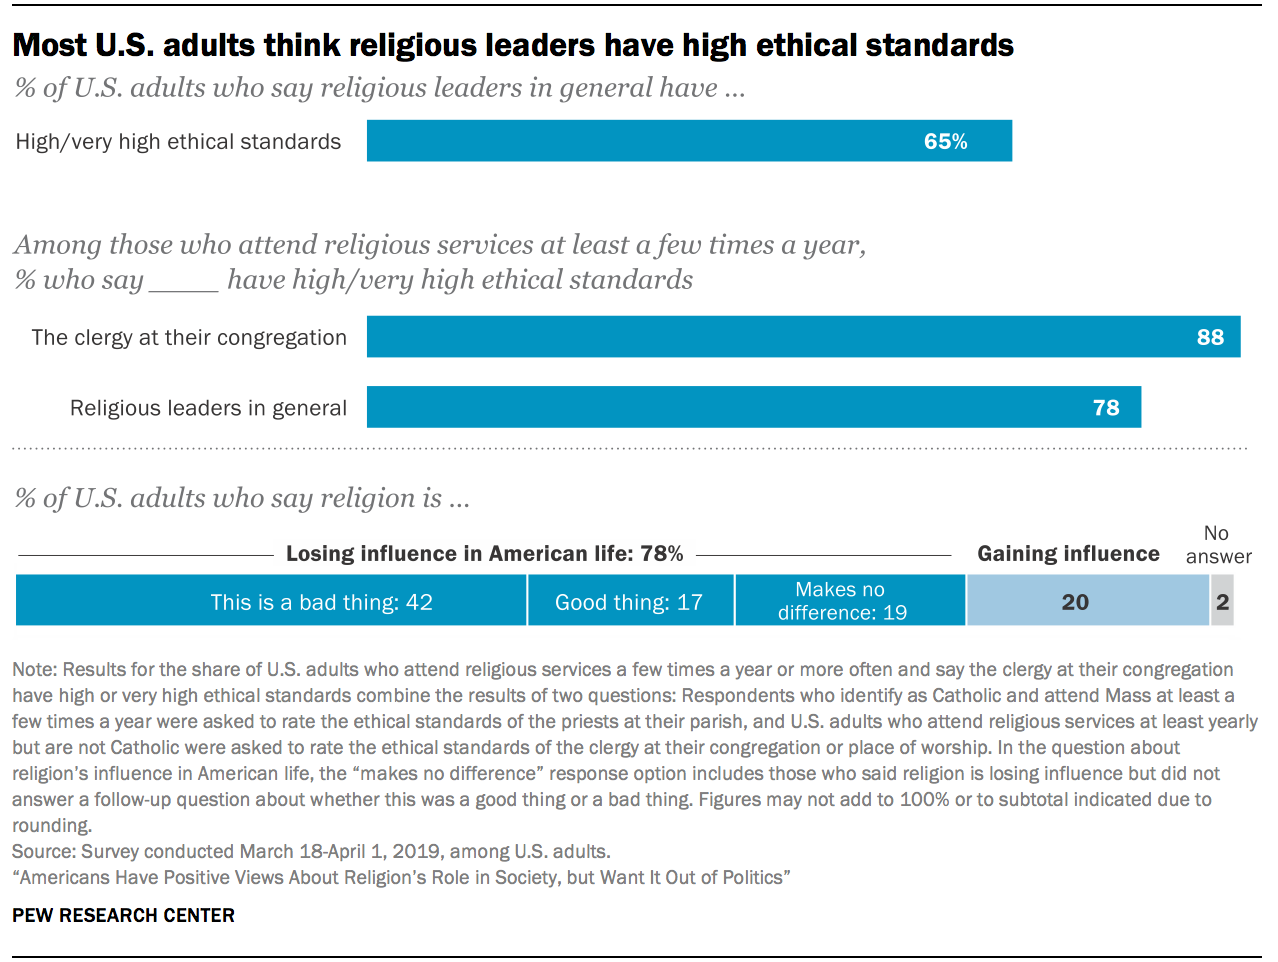 Most U.S. adults think religious leaders have high ethical standards